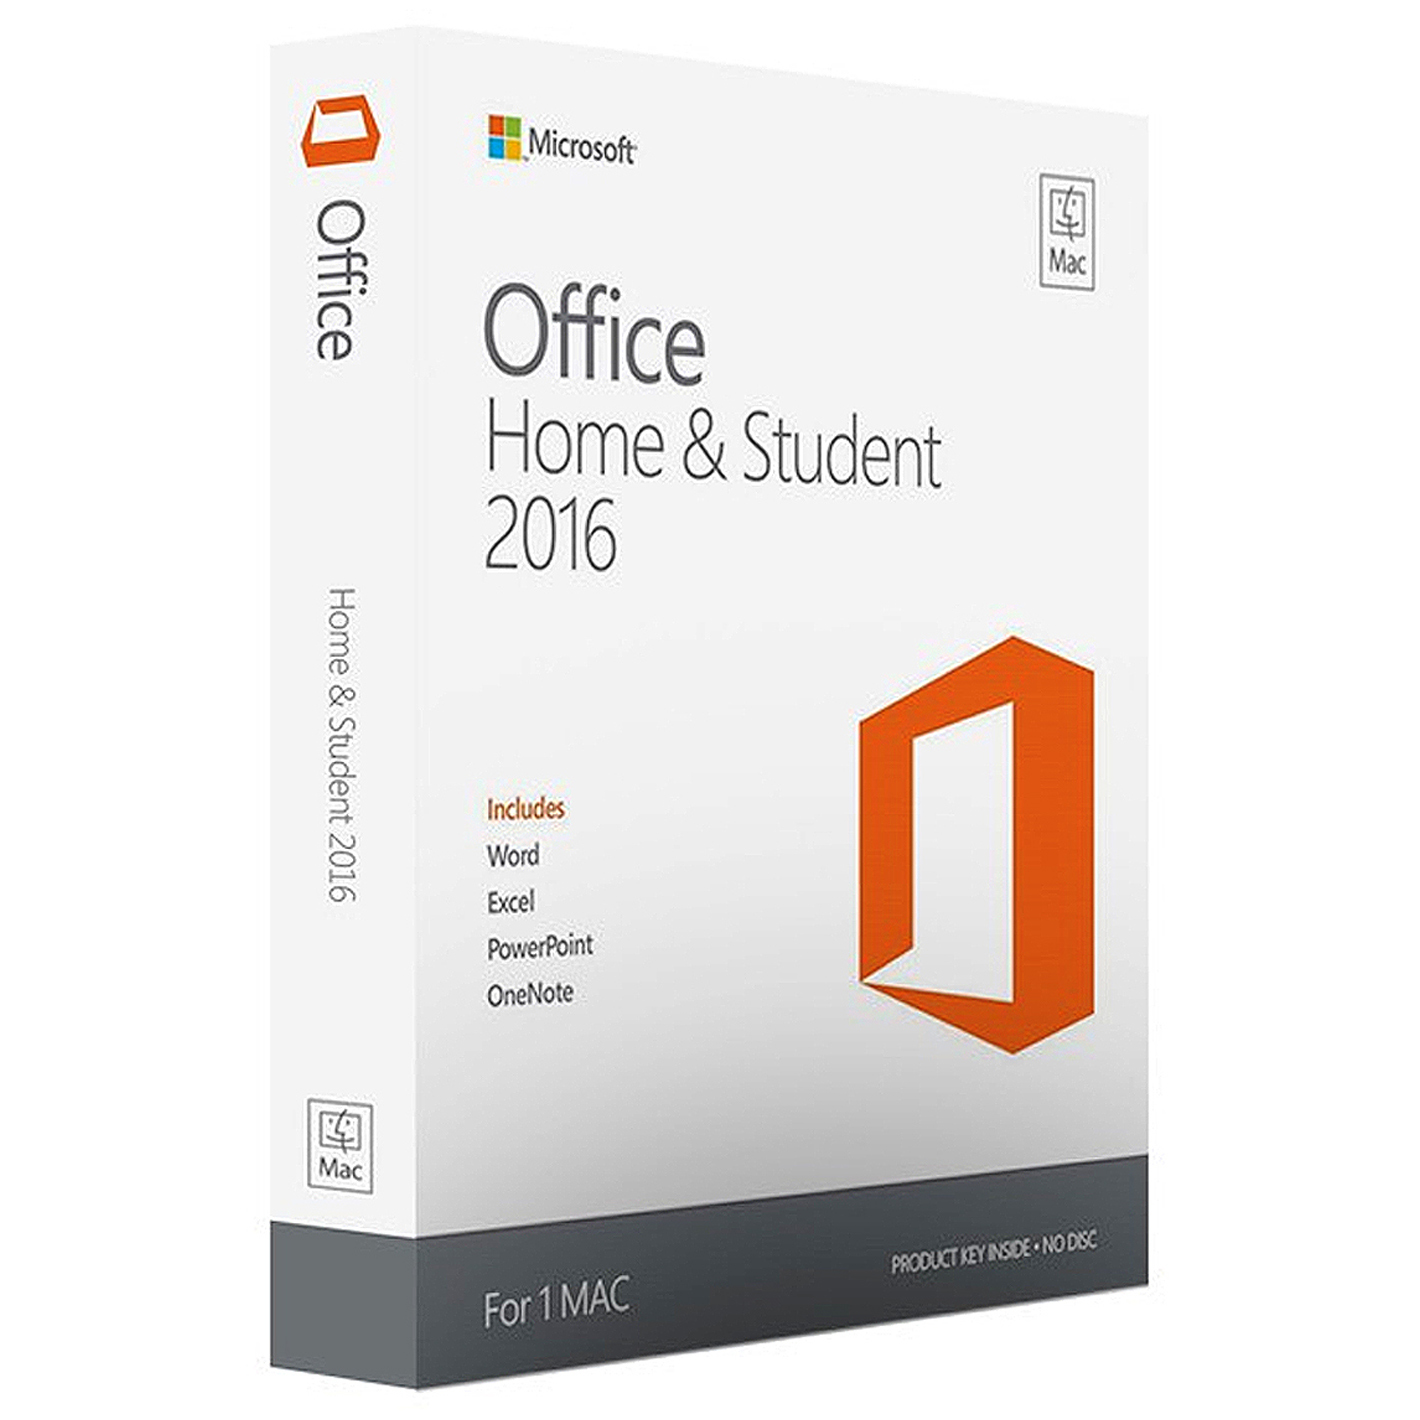 microsoft office home & student 2016 for mac torrent